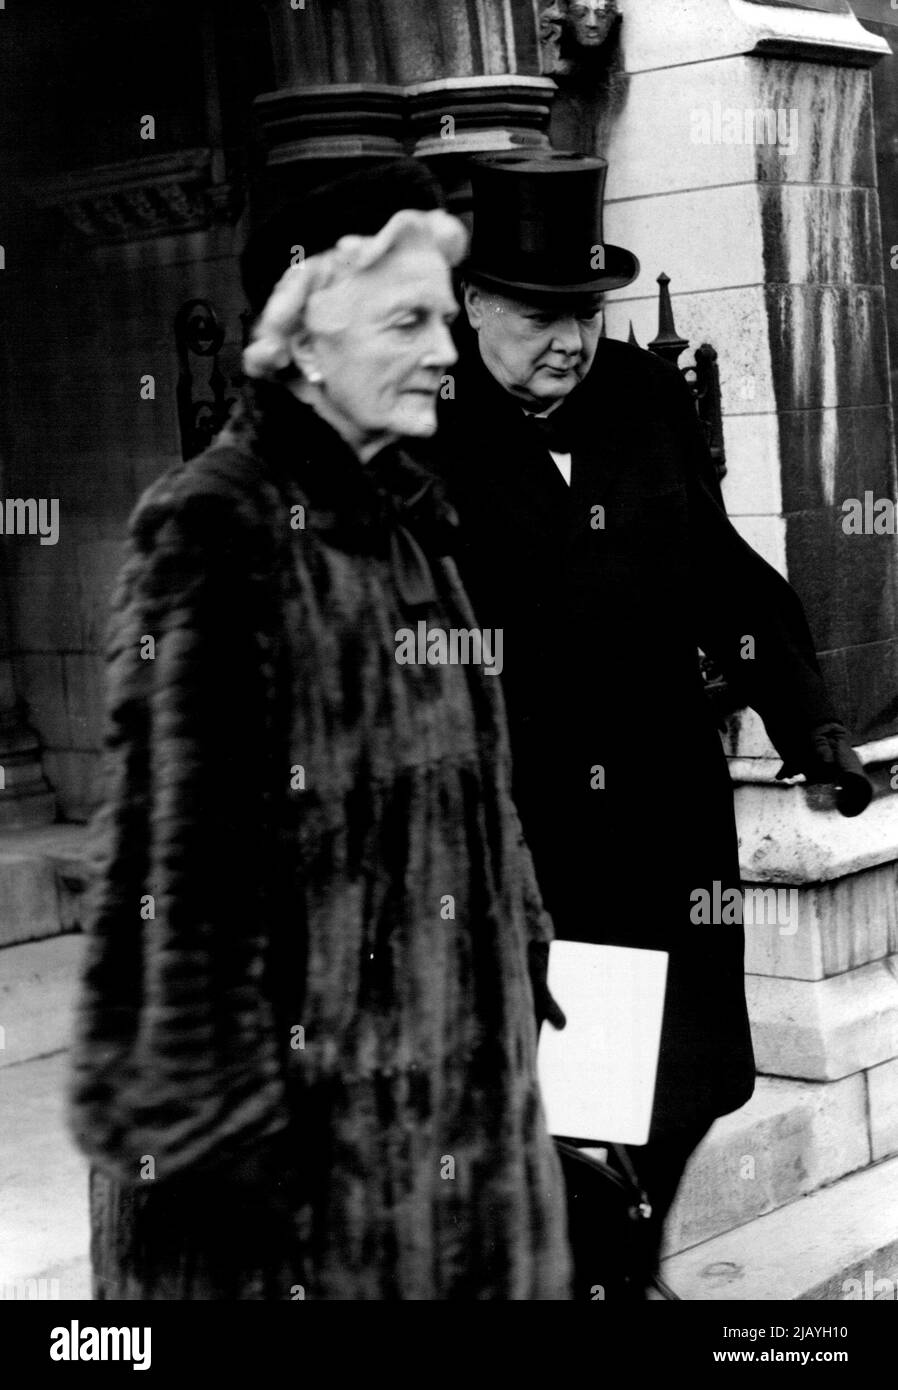 Memorial Service For Lord Norwich: Sir Winston and Lady Churchill leaving St. Margaret's, after the service this morning. A memorial service for Lord Norwich, was hold today at St. Margaret's, Westminster. January 07, 1953. (Photo by Fox Photos). Stock Photo